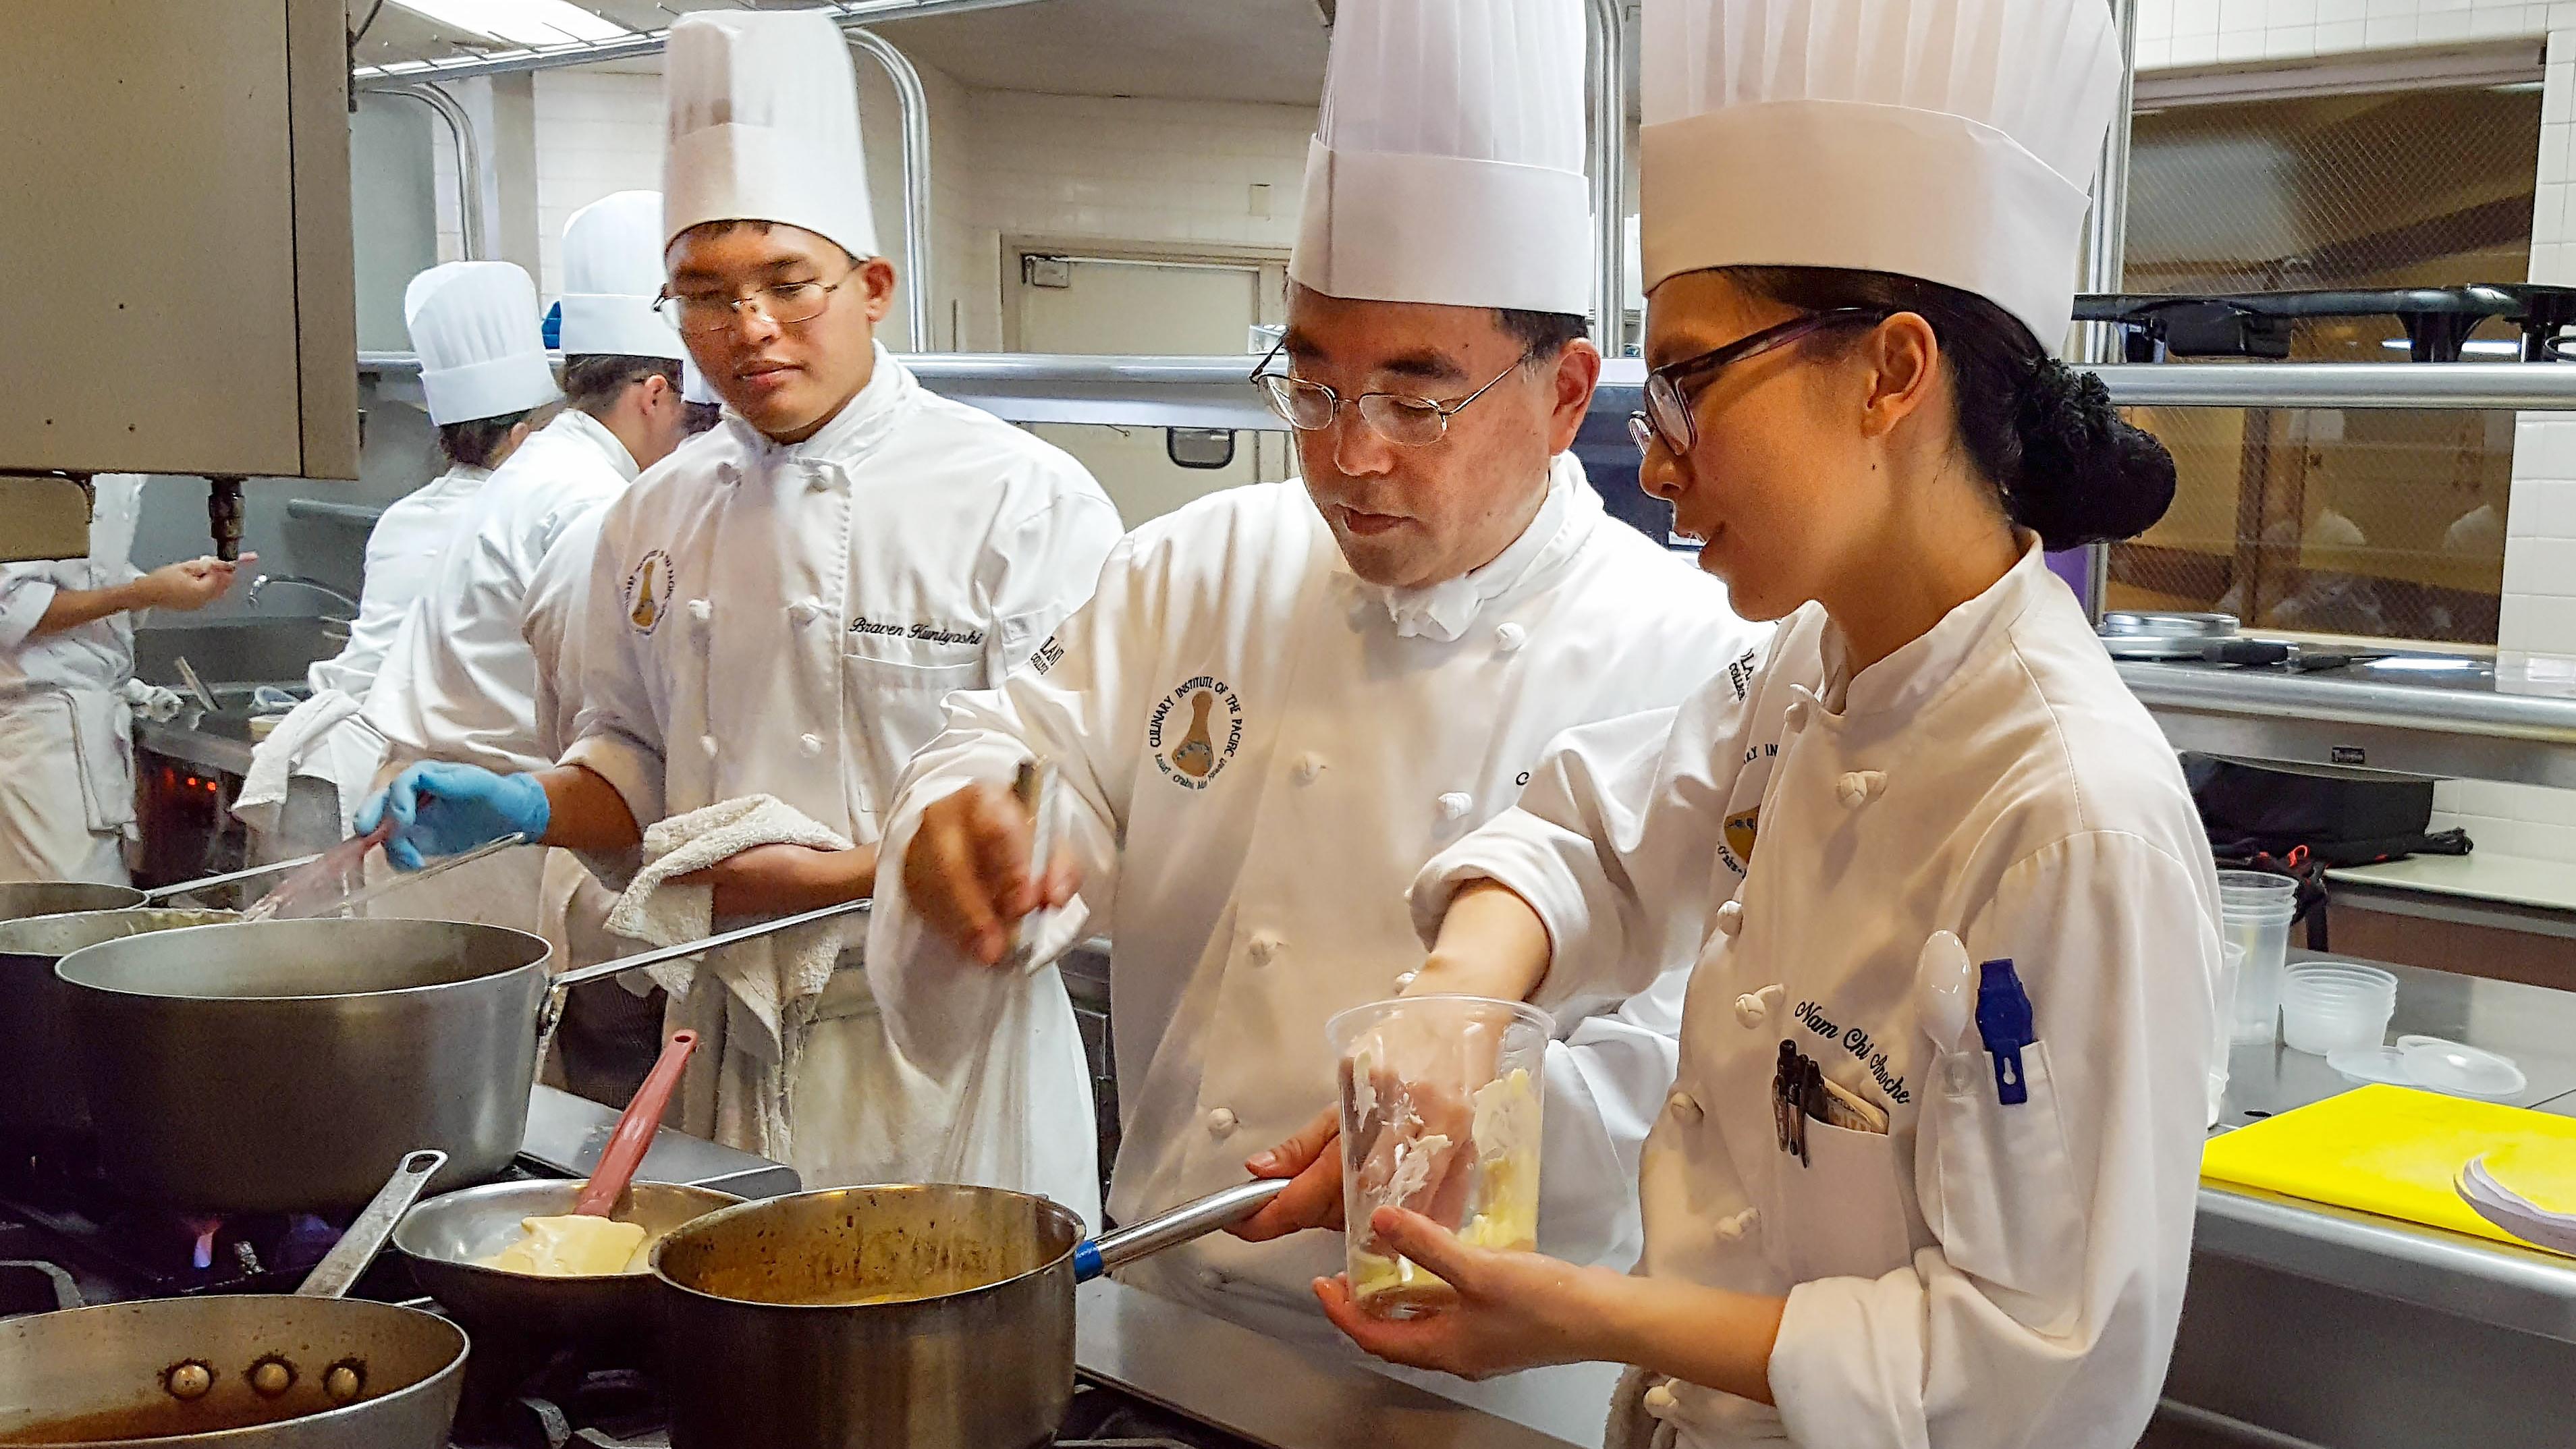 The Culinary Institute of the Pacific at Kapi’olani Community College Announces the Continuation and Expansion of Their FREE Hospitality Apprenticeship Programs!